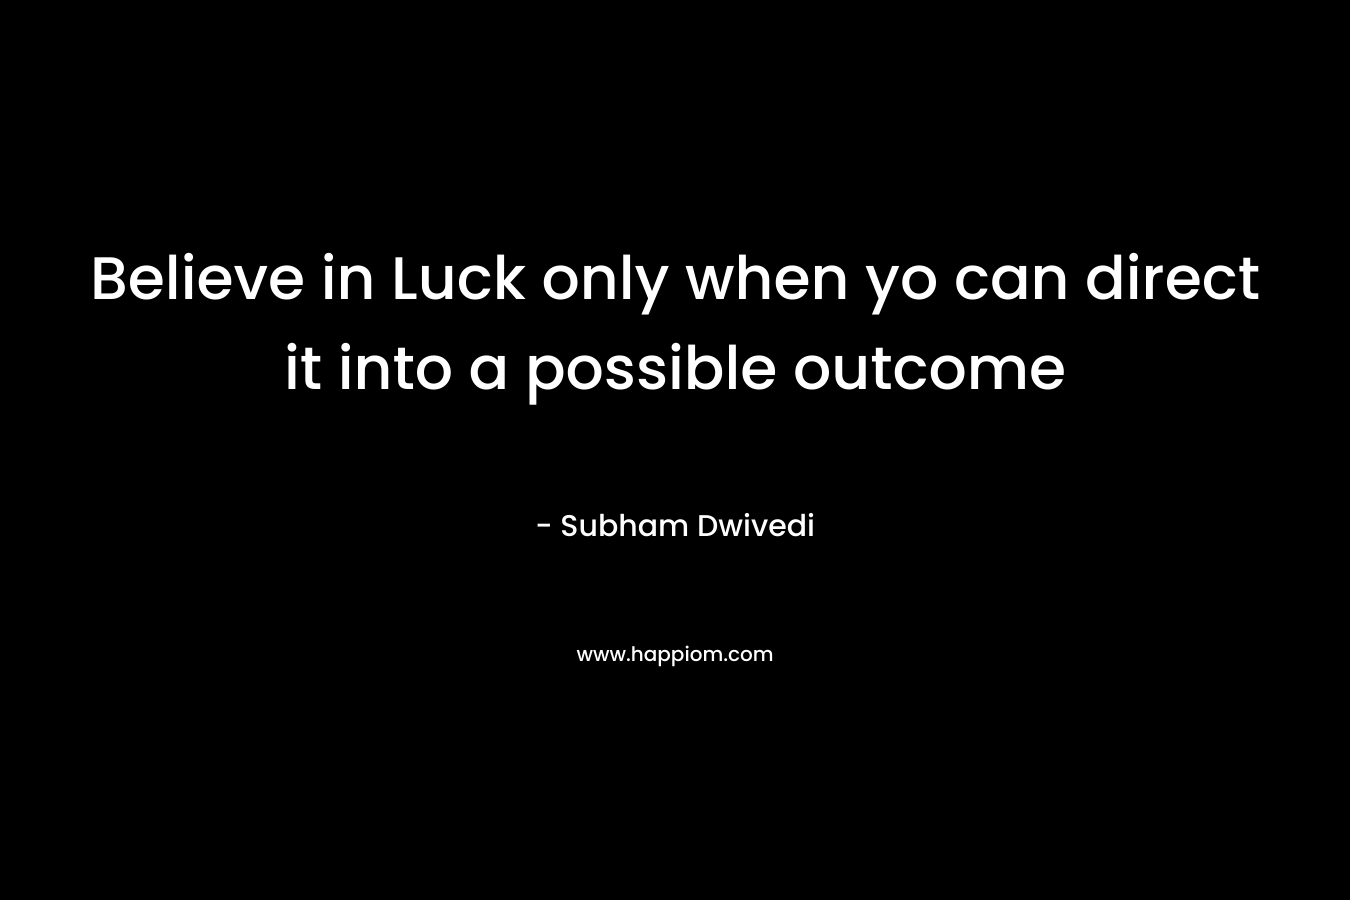 Believe in Luck only when yo can direct it into a possible outcome – Subham Dwivedi